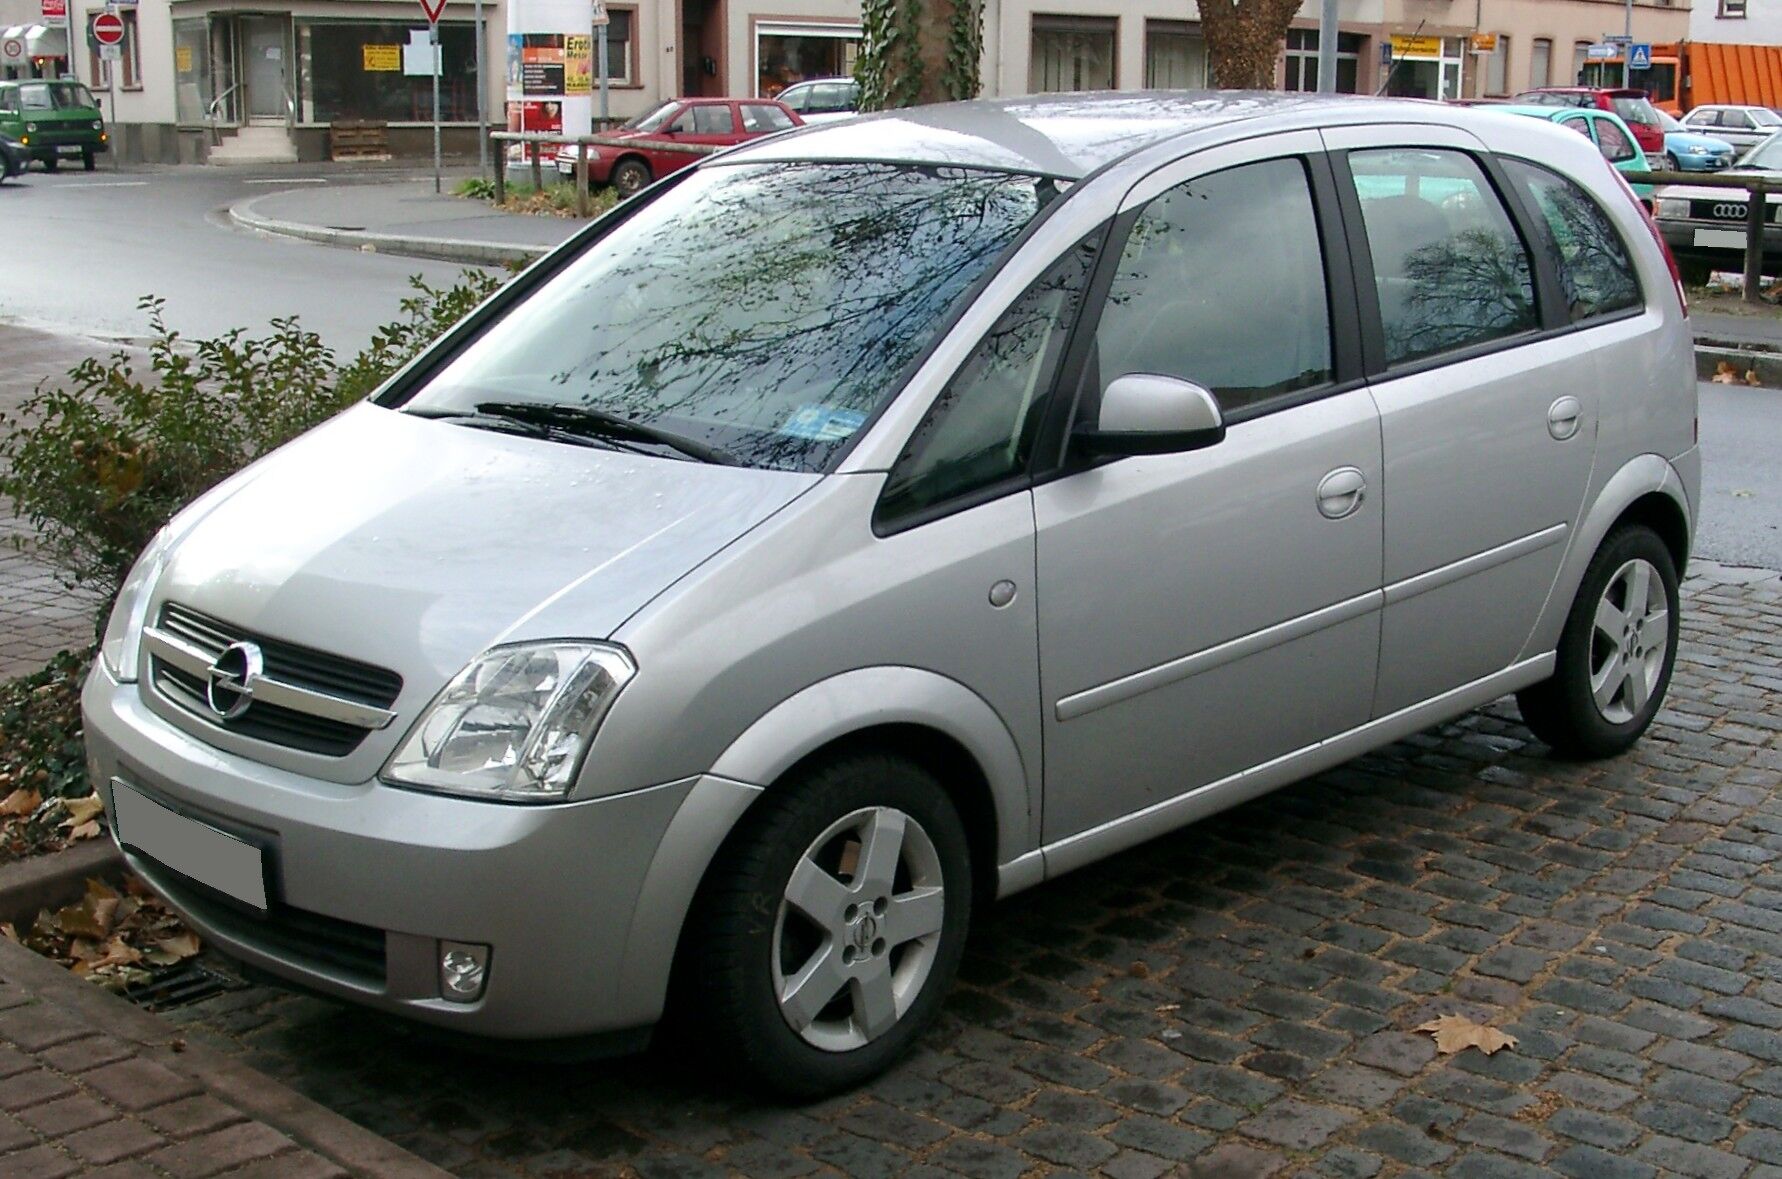 File:Opel Astra Design Edition (J) – Frontansicht (1), 14. August